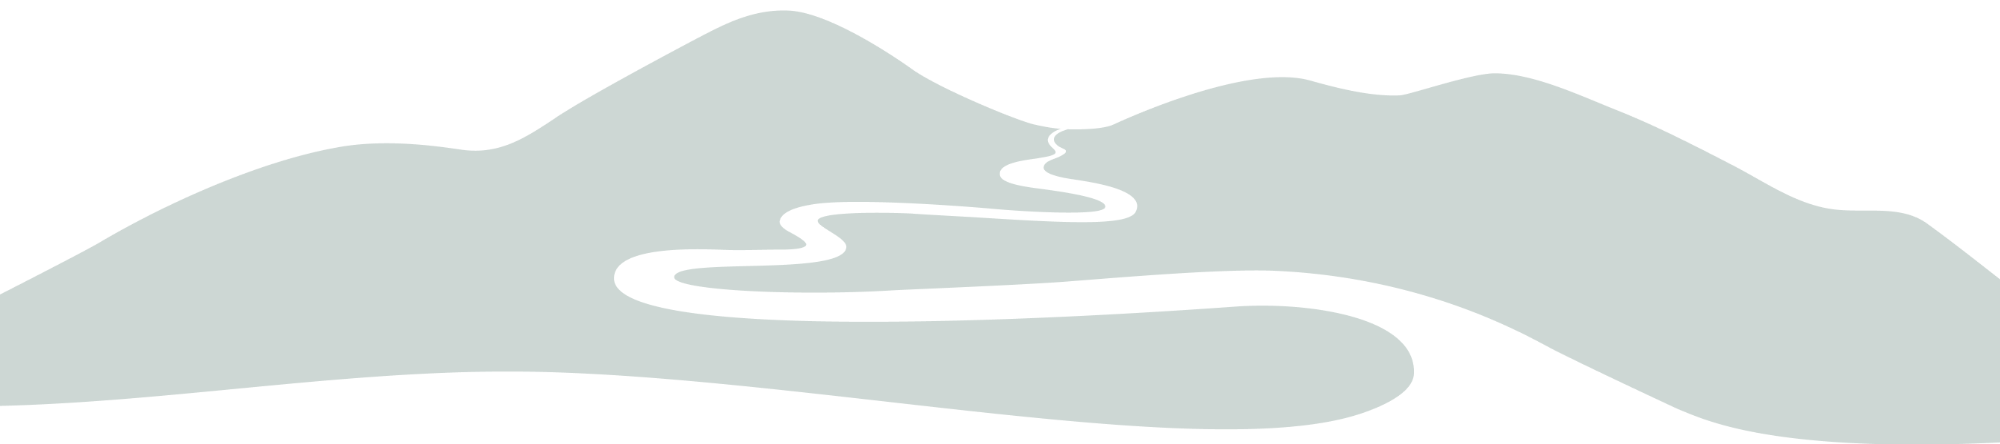 Simplified image of the mountains.